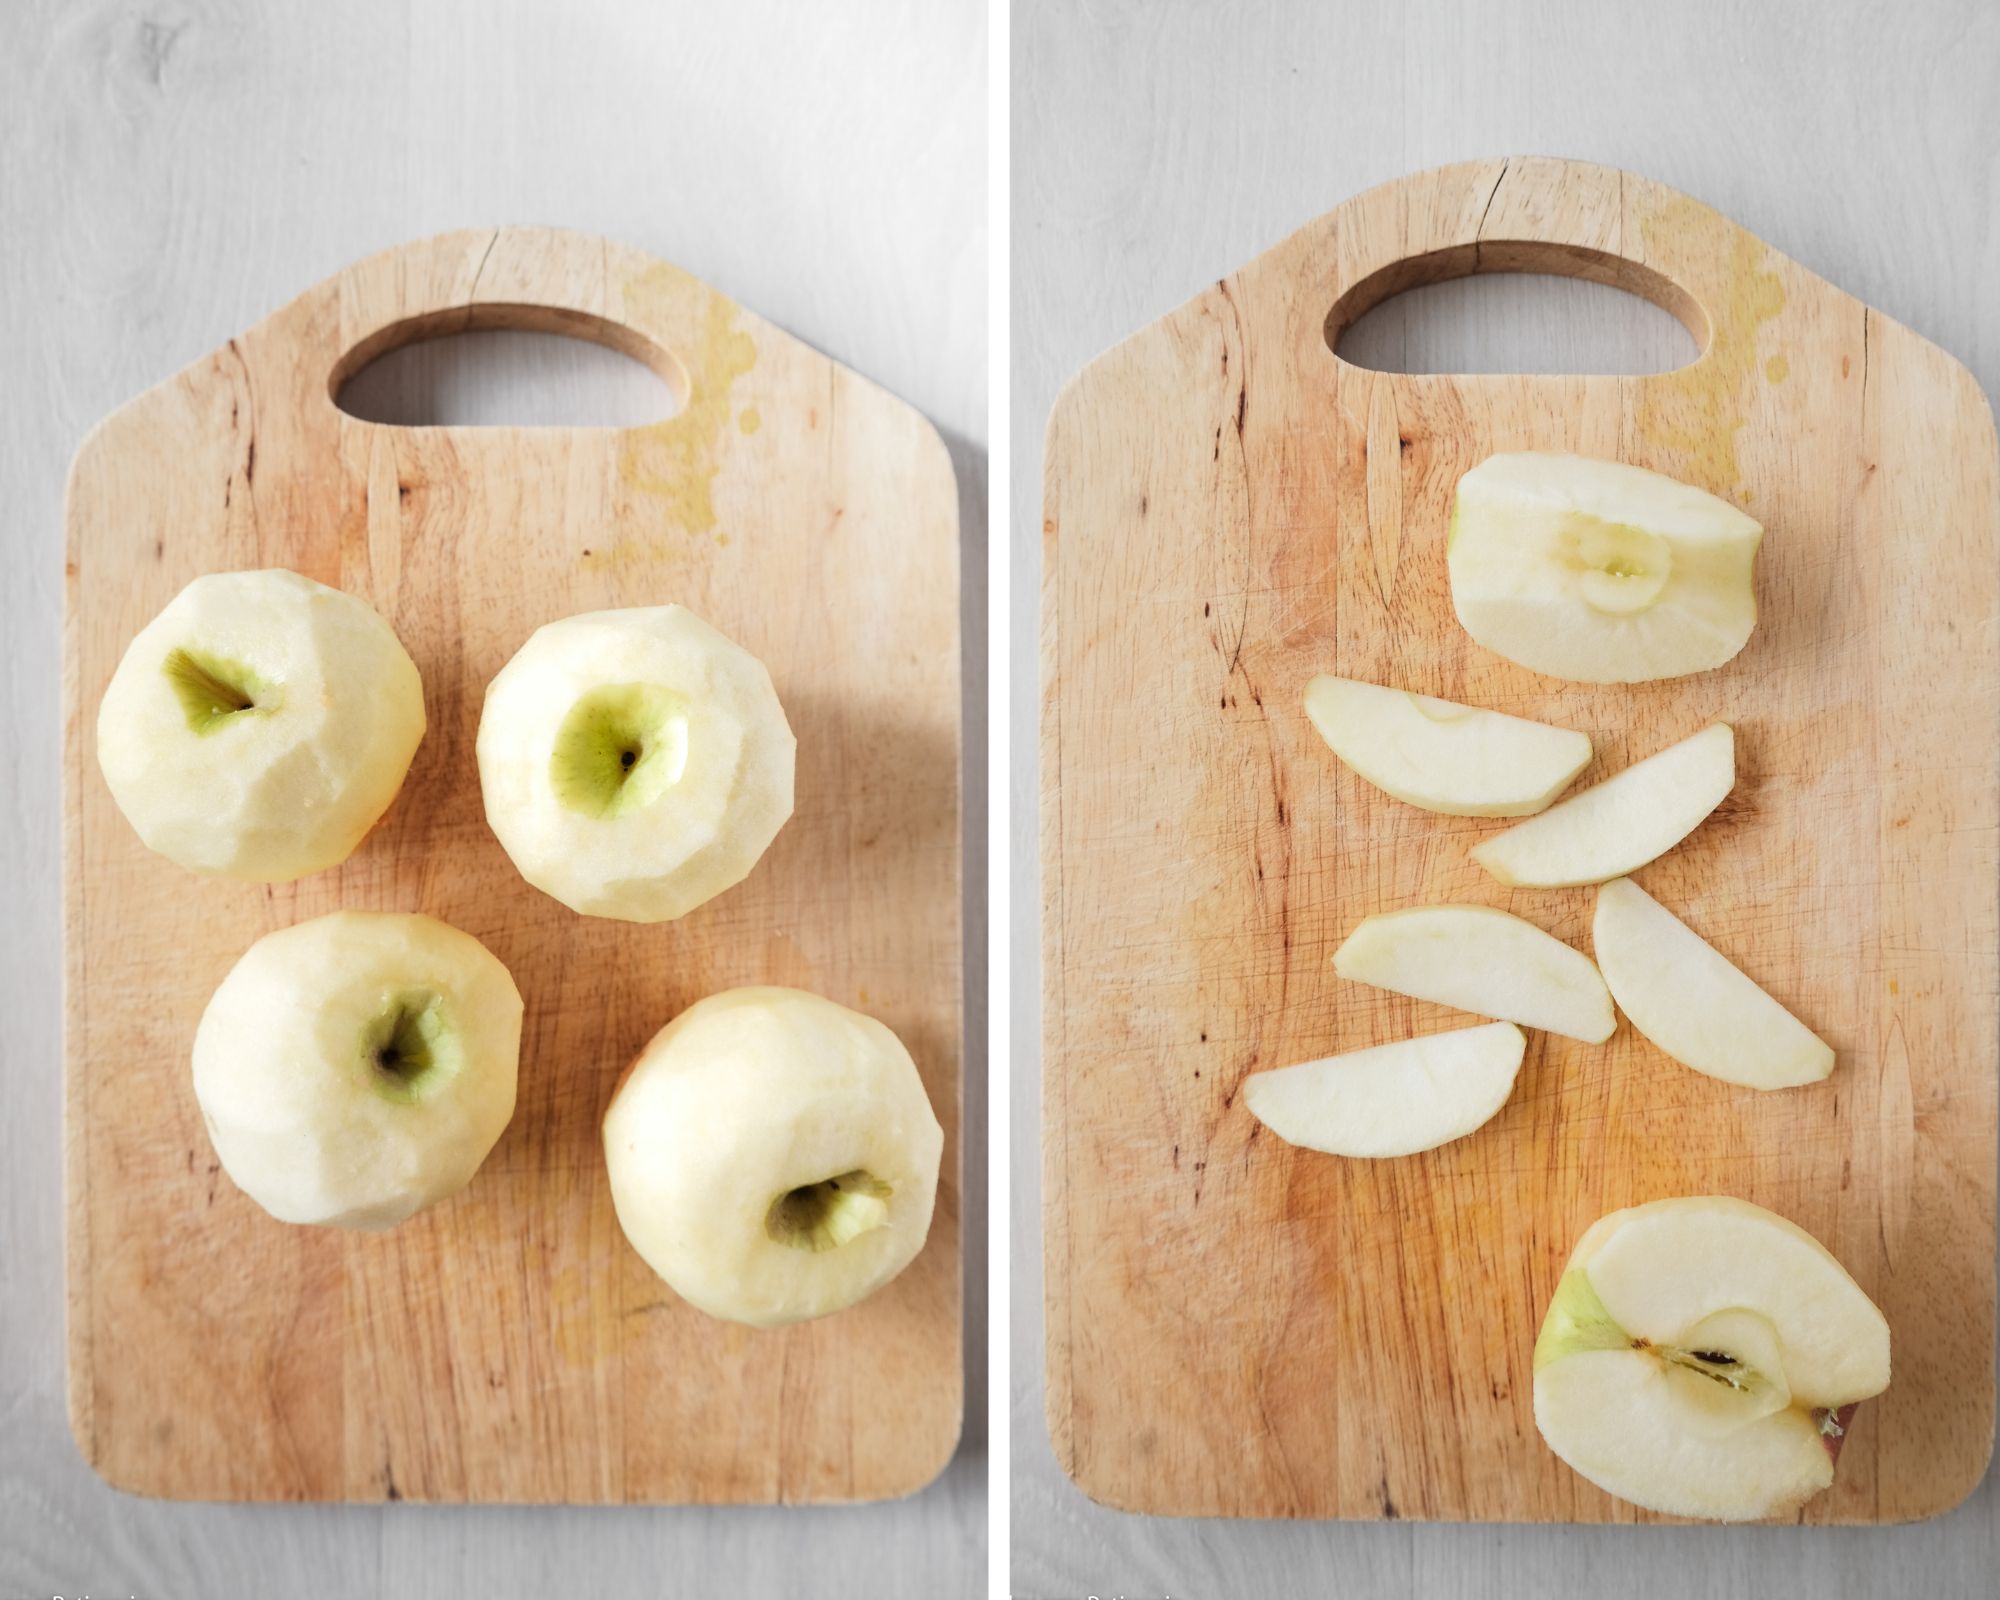 Peeled apples sliced into thin wedges on a wooden board.